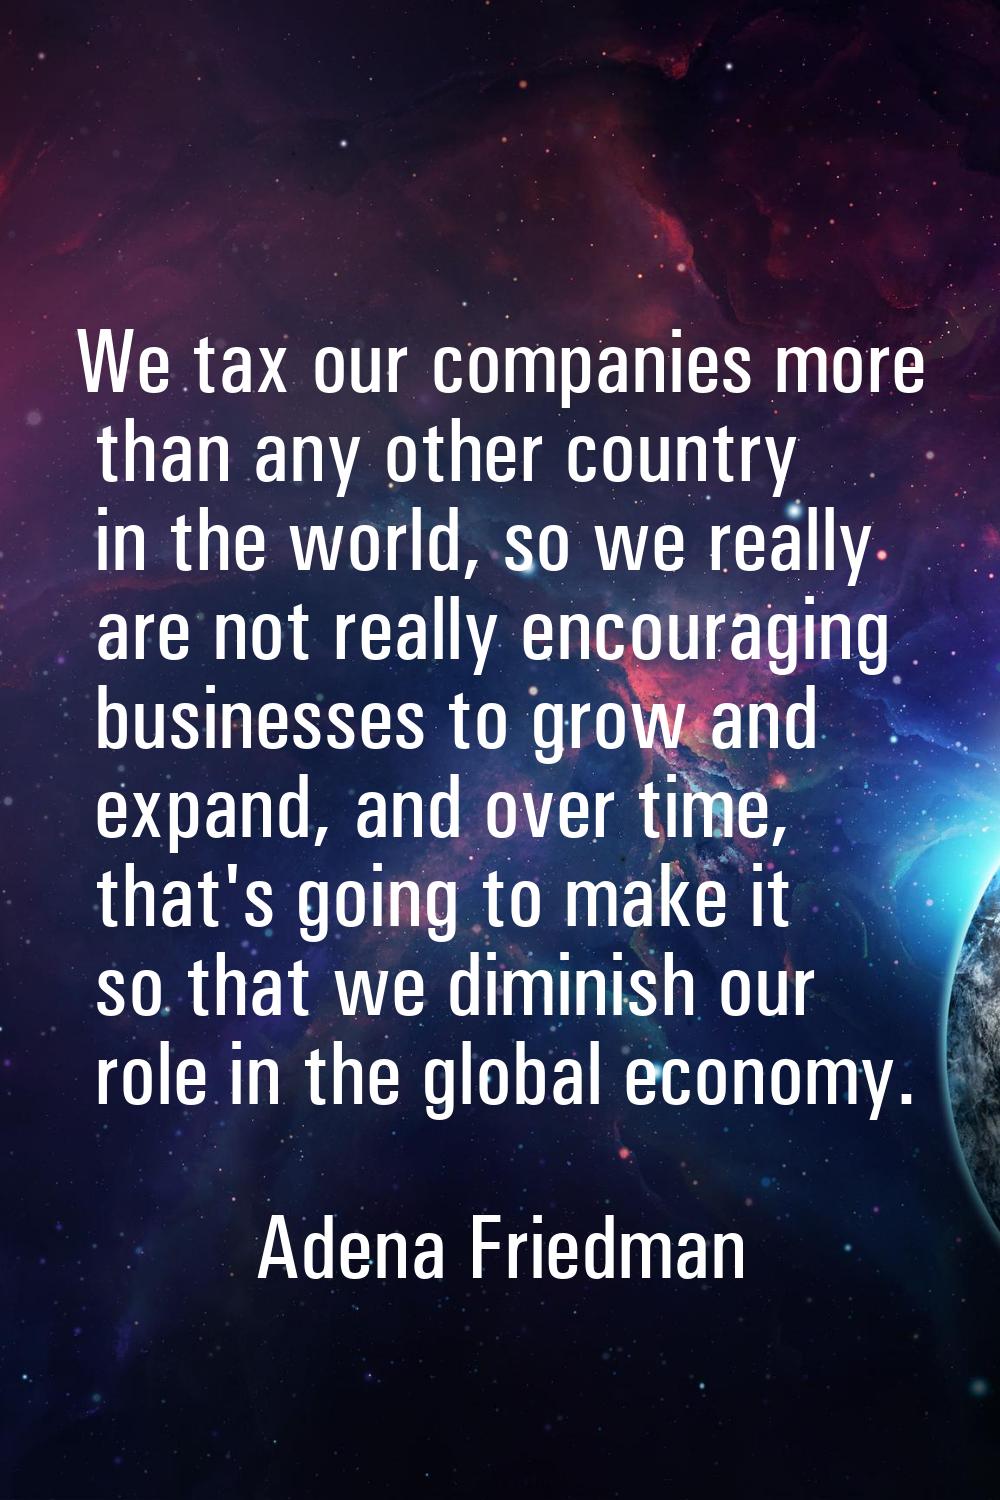 We tax our companies more than any other country in the world, so we really are not really encourag